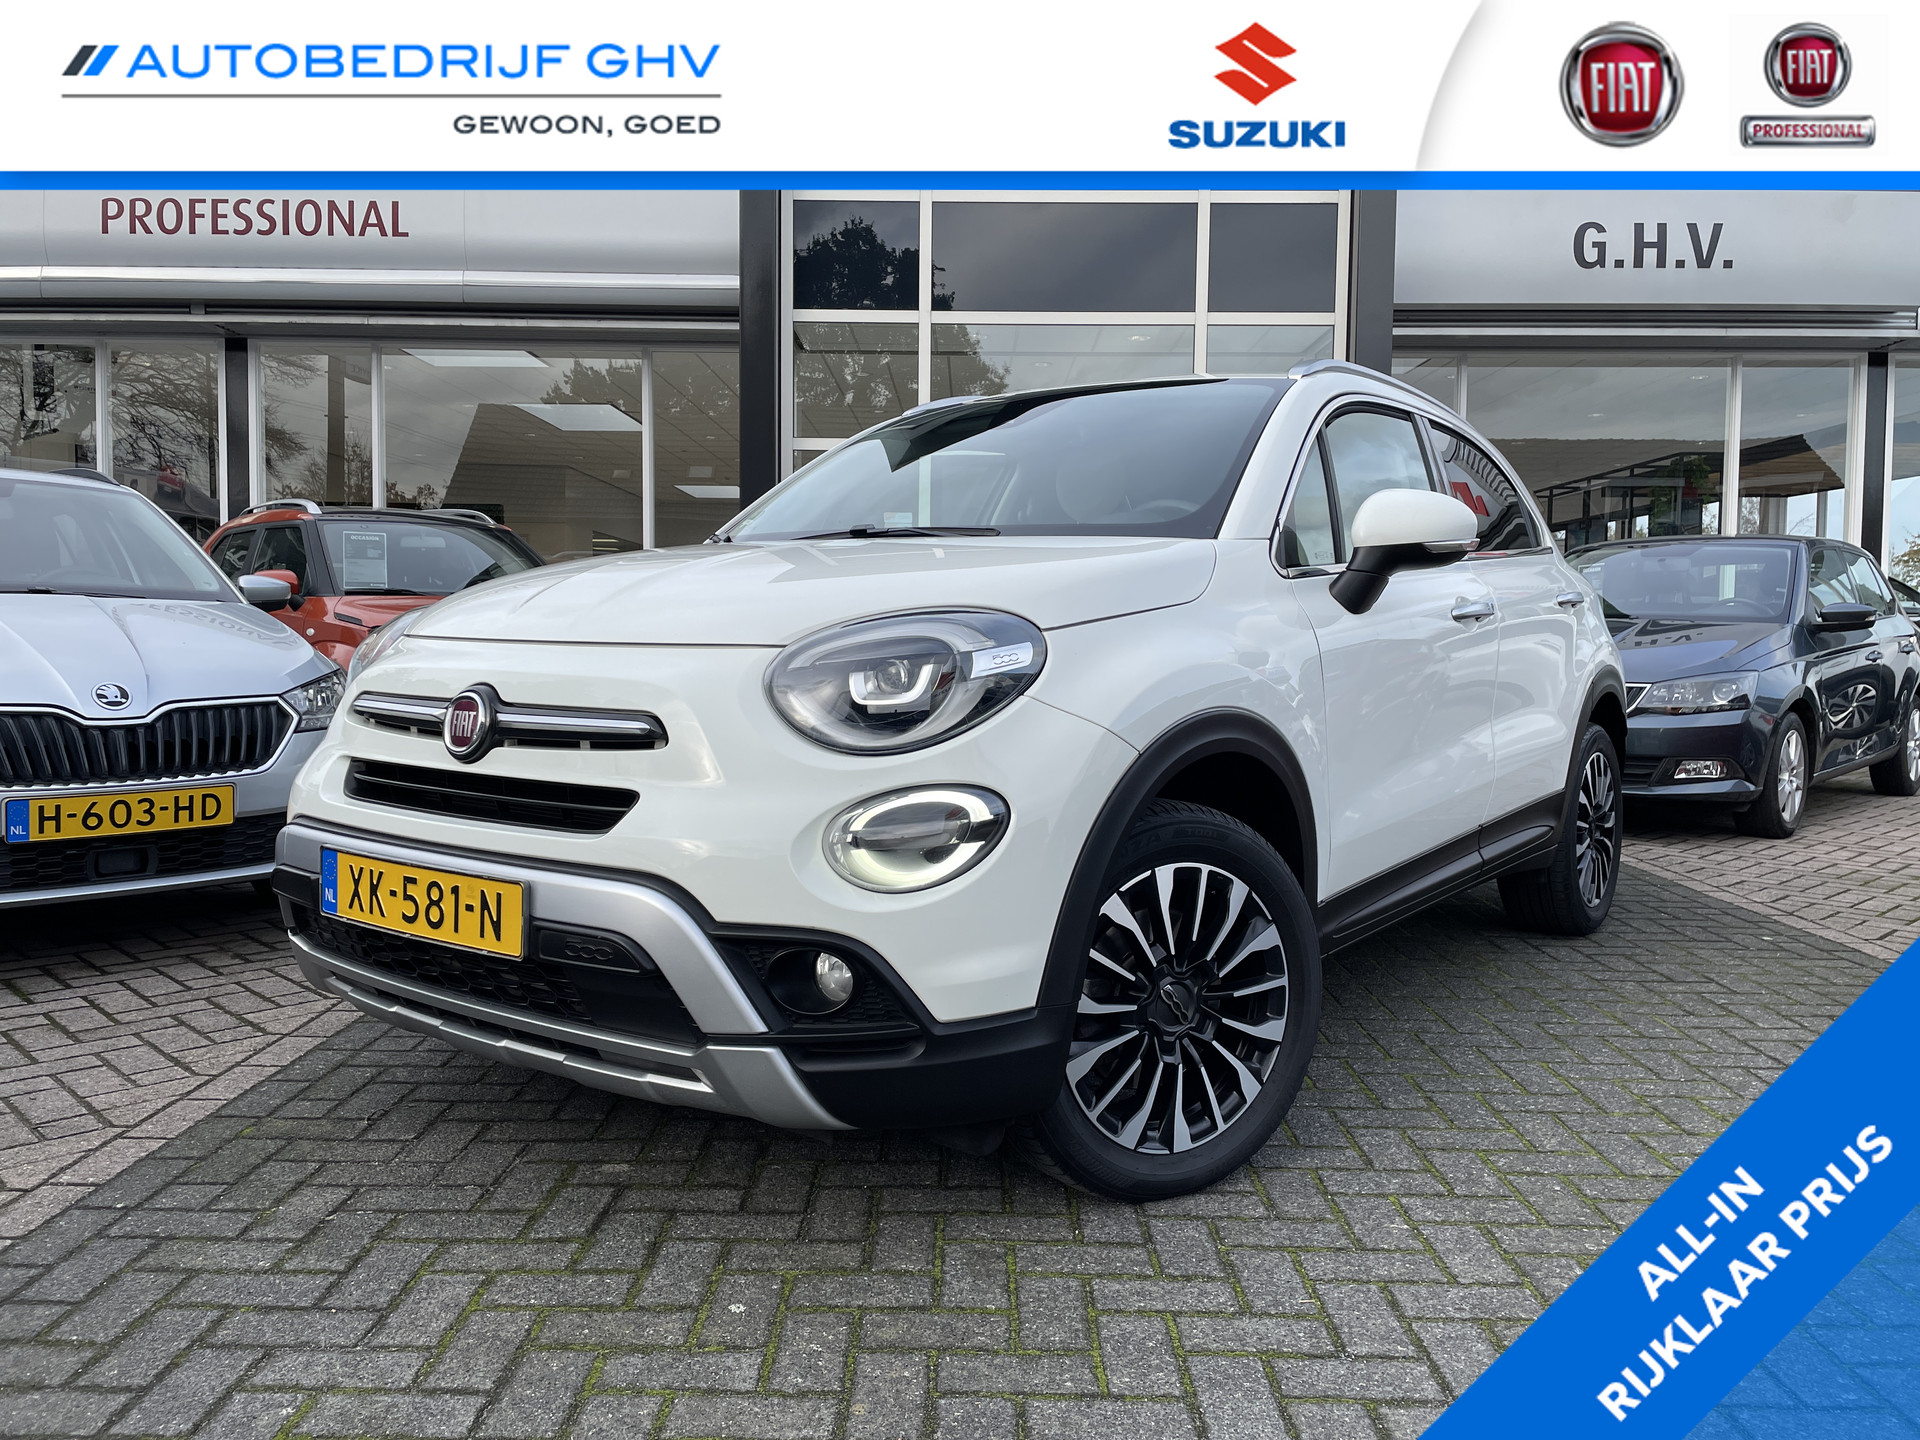 FIAT 500X 1.3 GSE 150pk DCT City Cross Opening Edition bij viaBOVAG.nl